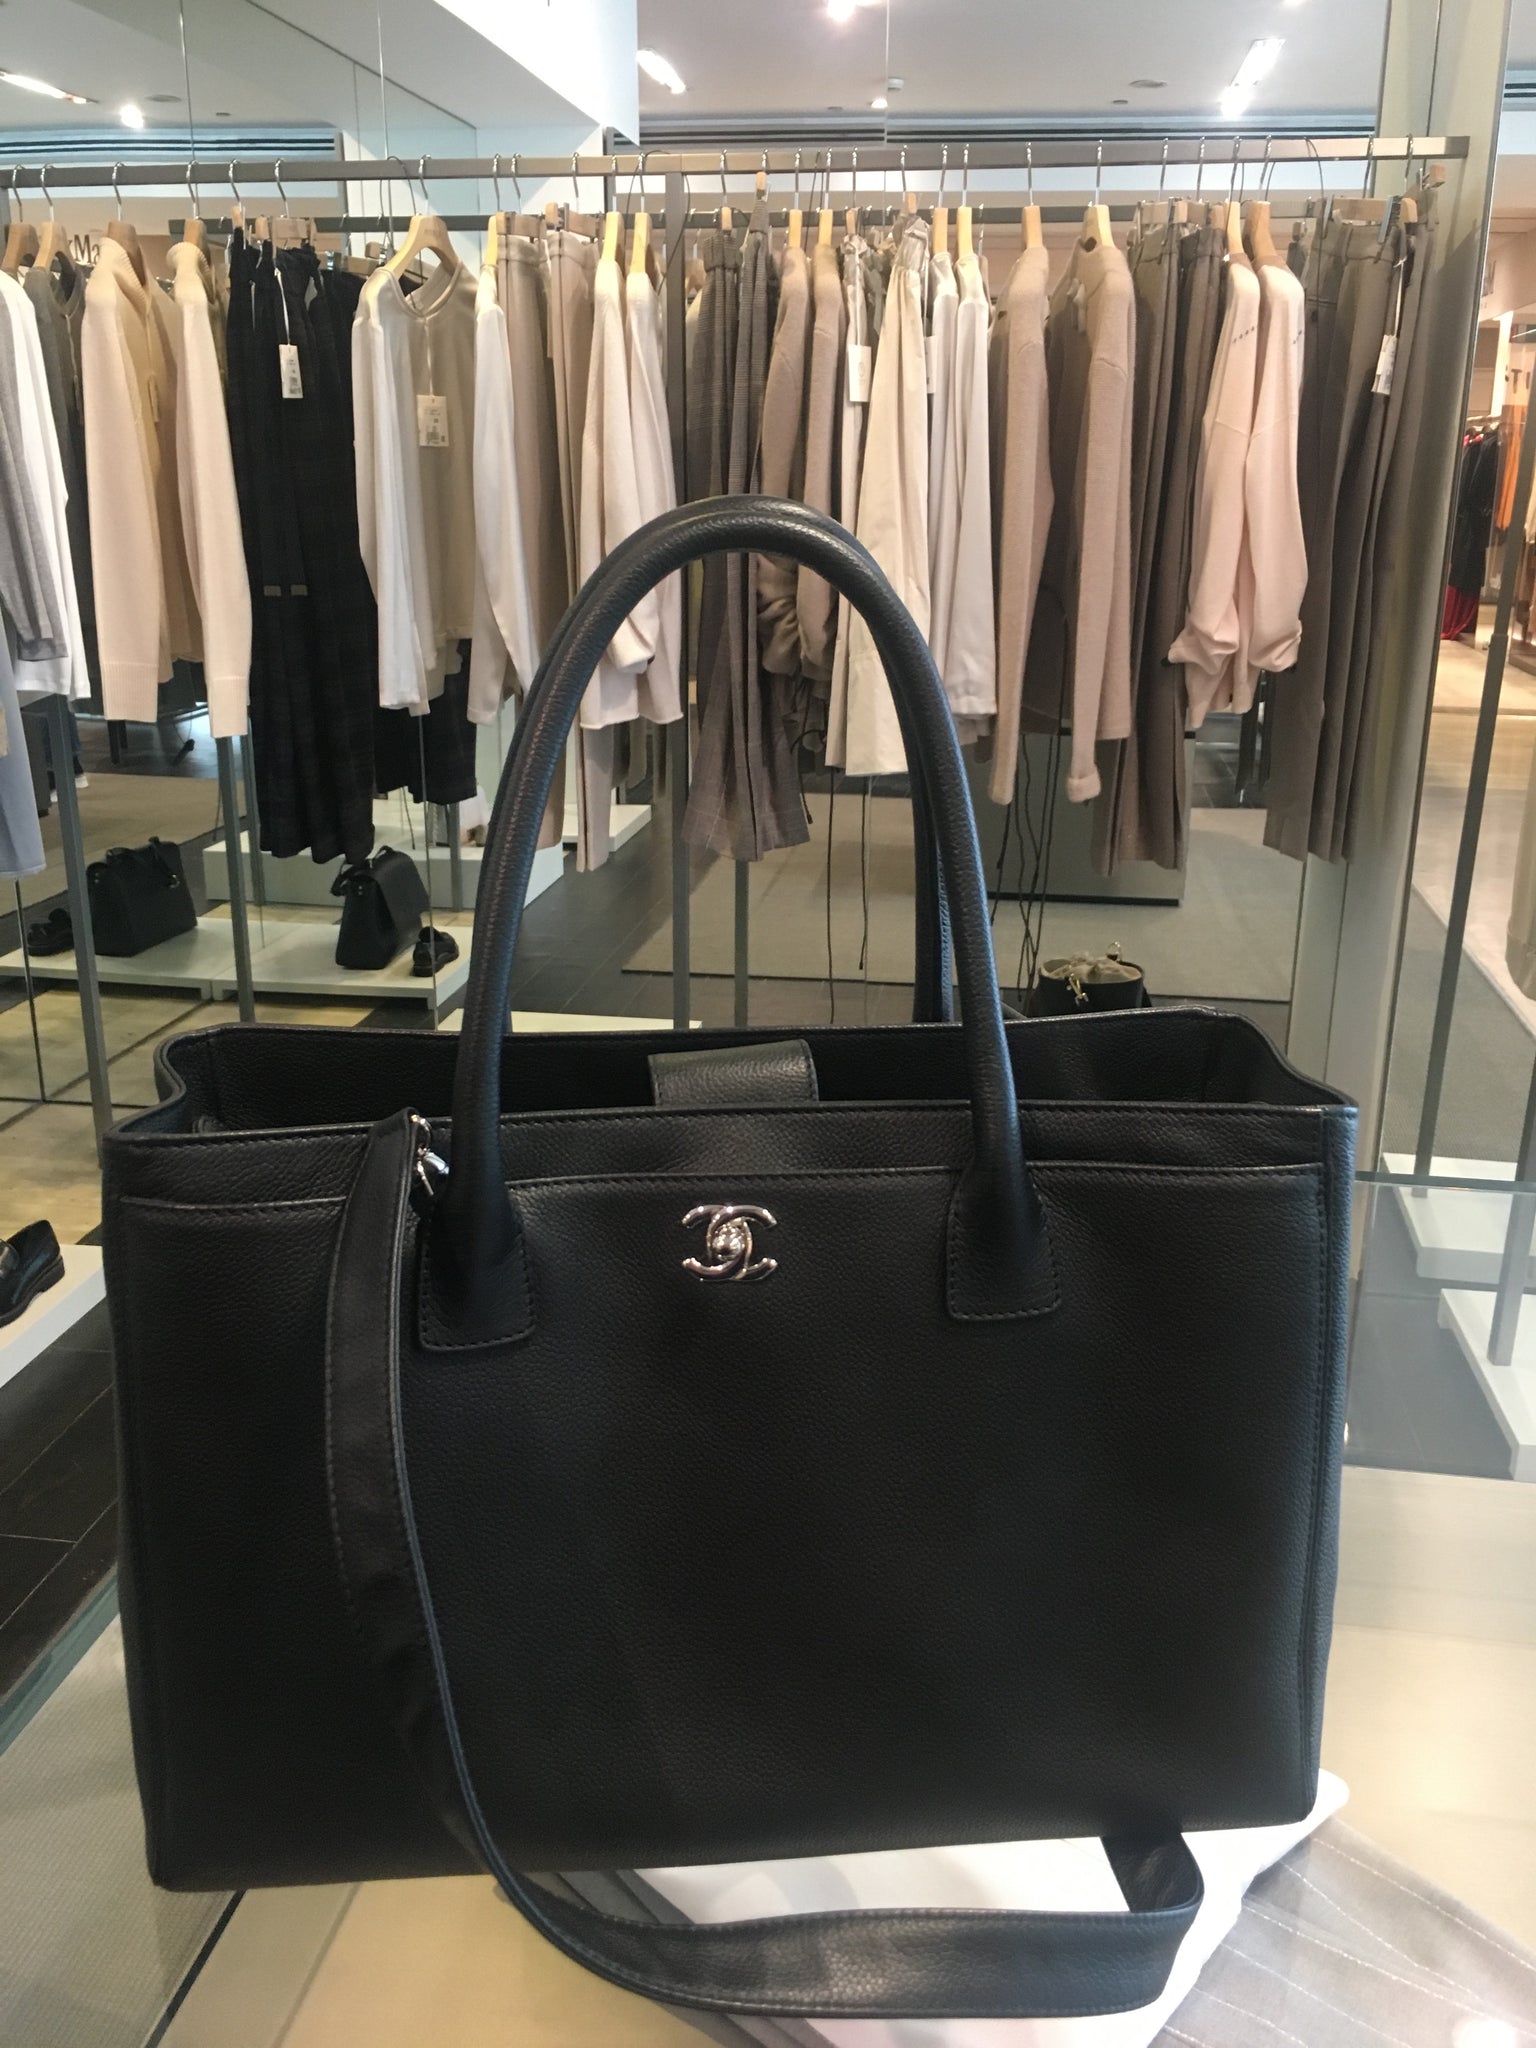 Chanel Cerf/Executive Tote shopping bag - LuxCollector